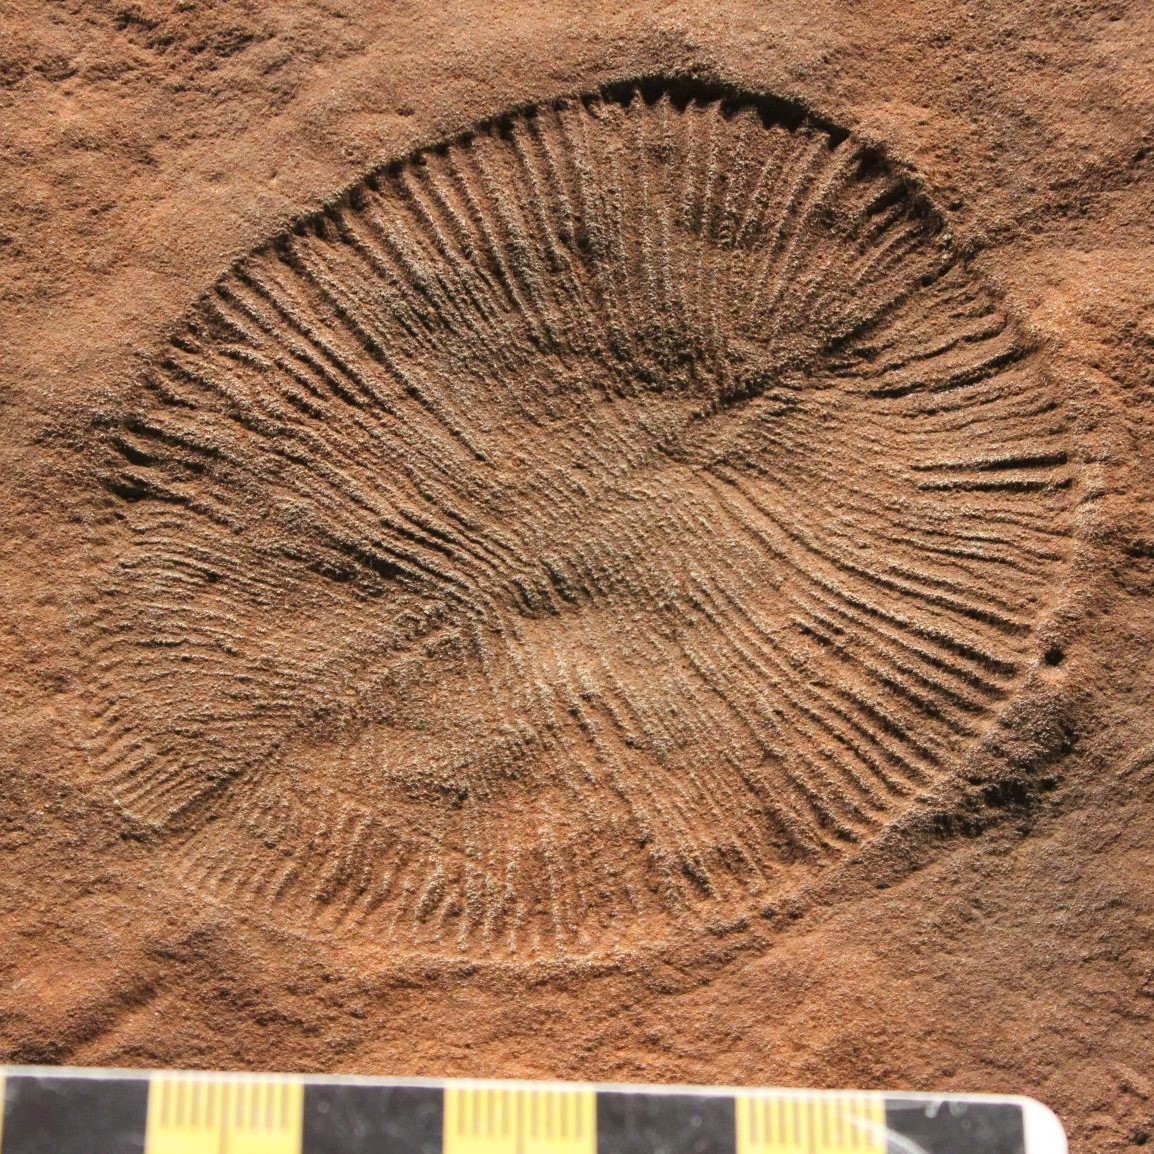 Image of a dinnerplate like Dickinsonia fossil from the South Australia Museum